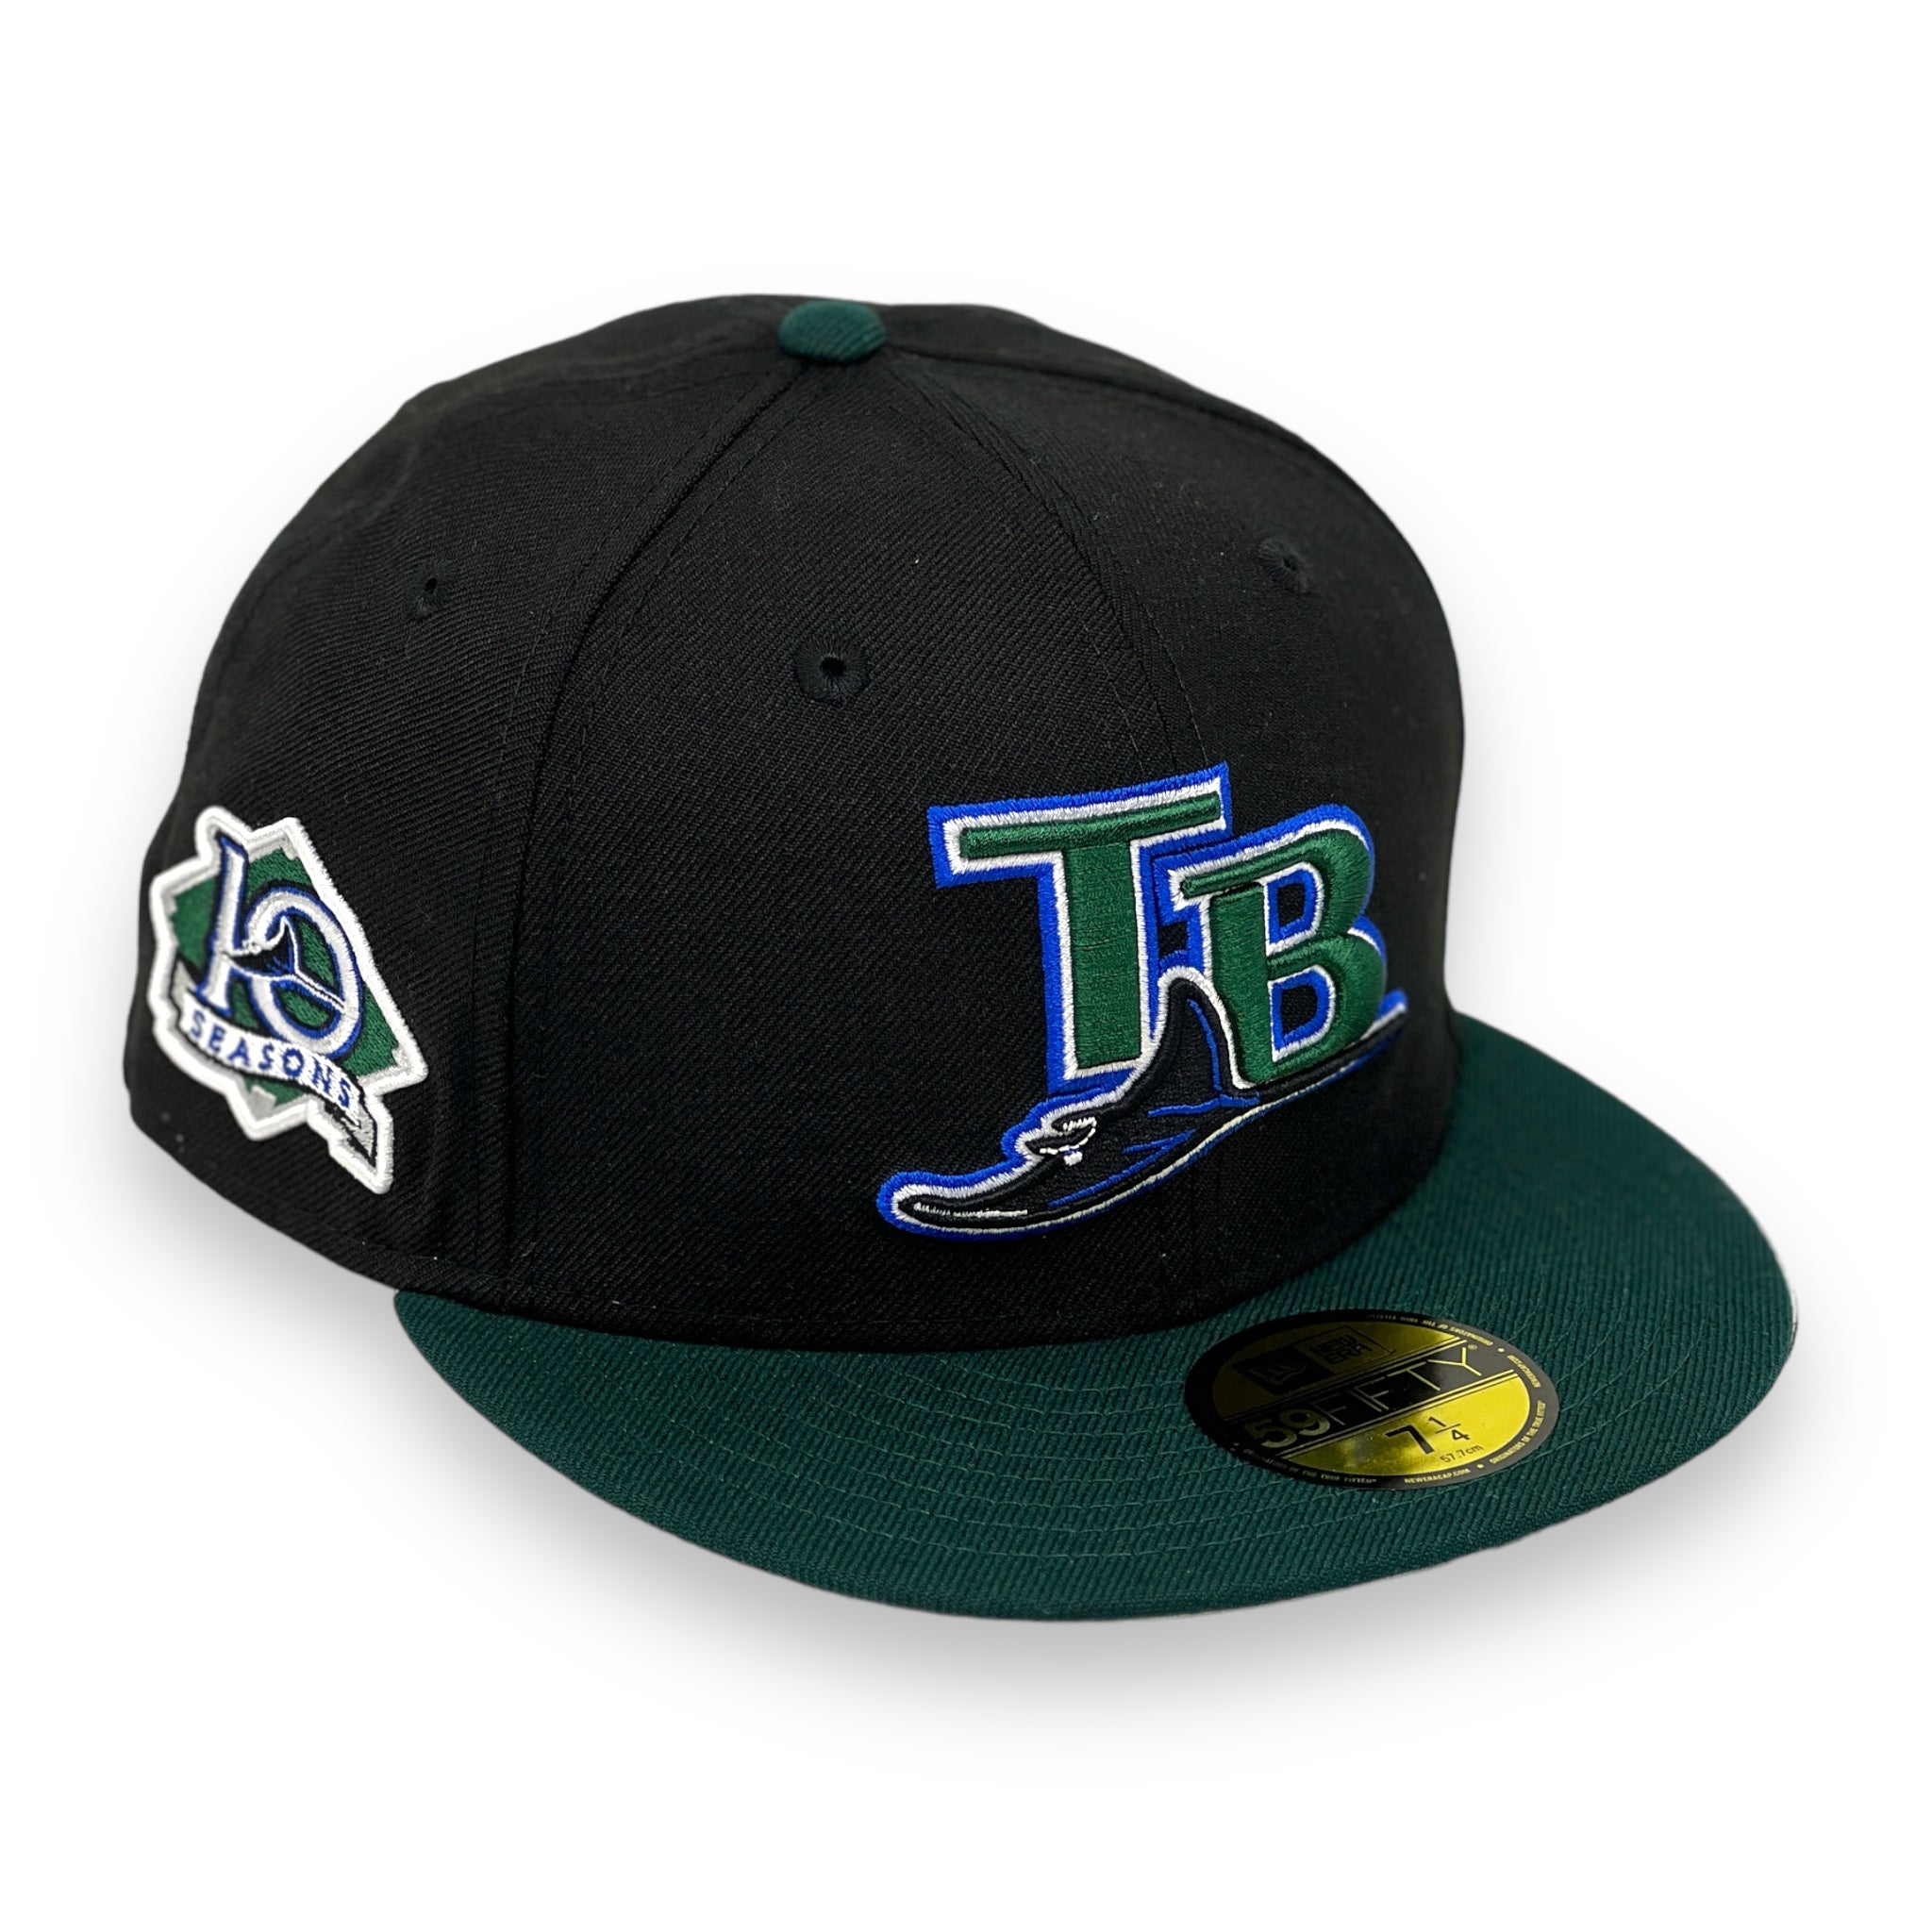 TAMPA BAY DEVIL RAYS (10TH ANN) NEW ERA 59FIFTY FITTED (GREEN UNDER VISOR)